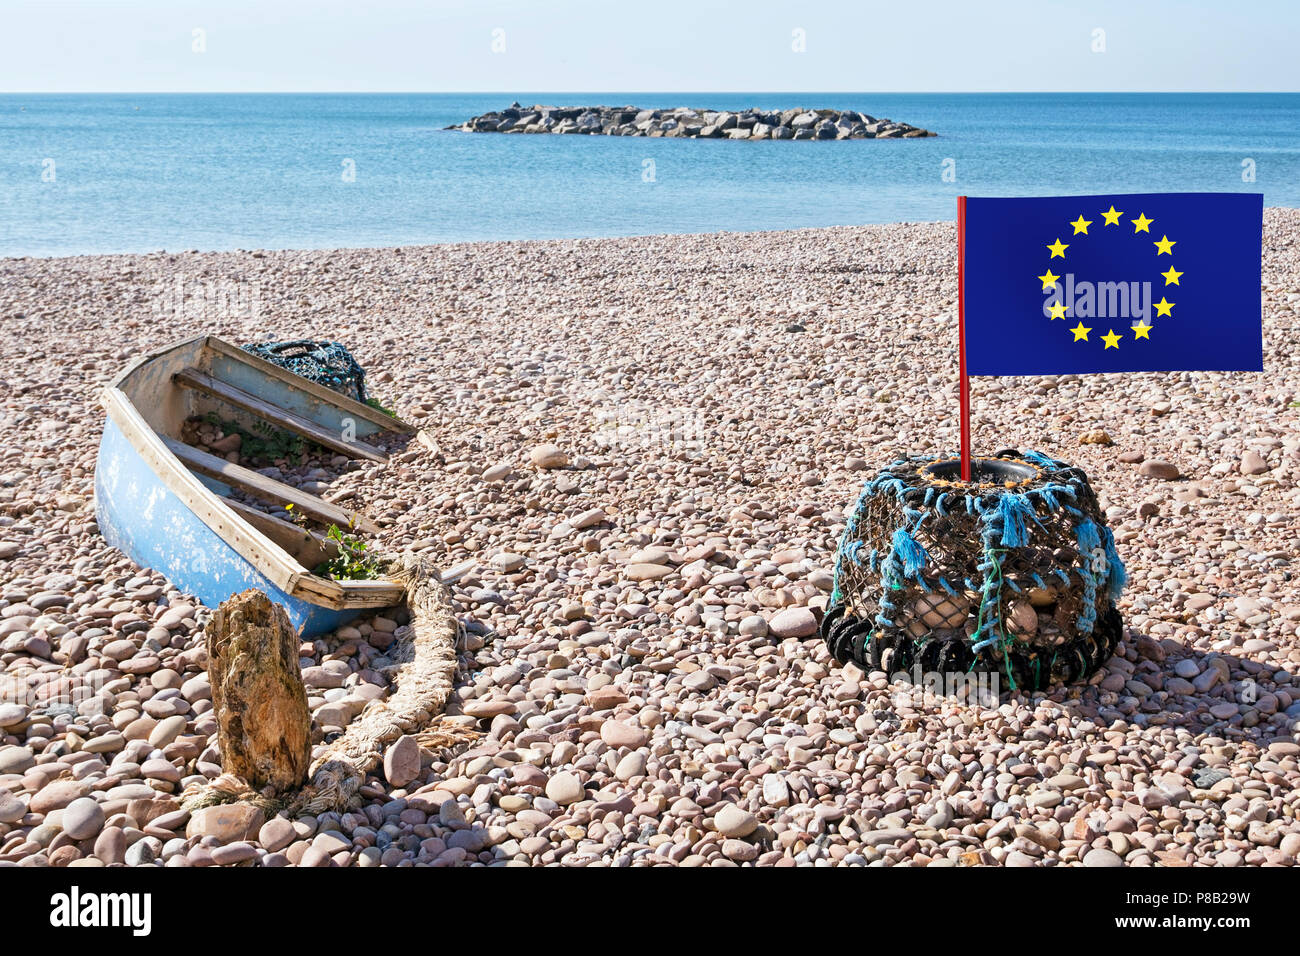 EU lobster pot on lonely beach. Brexit comment, Easy to get into. Concept Stock Photo